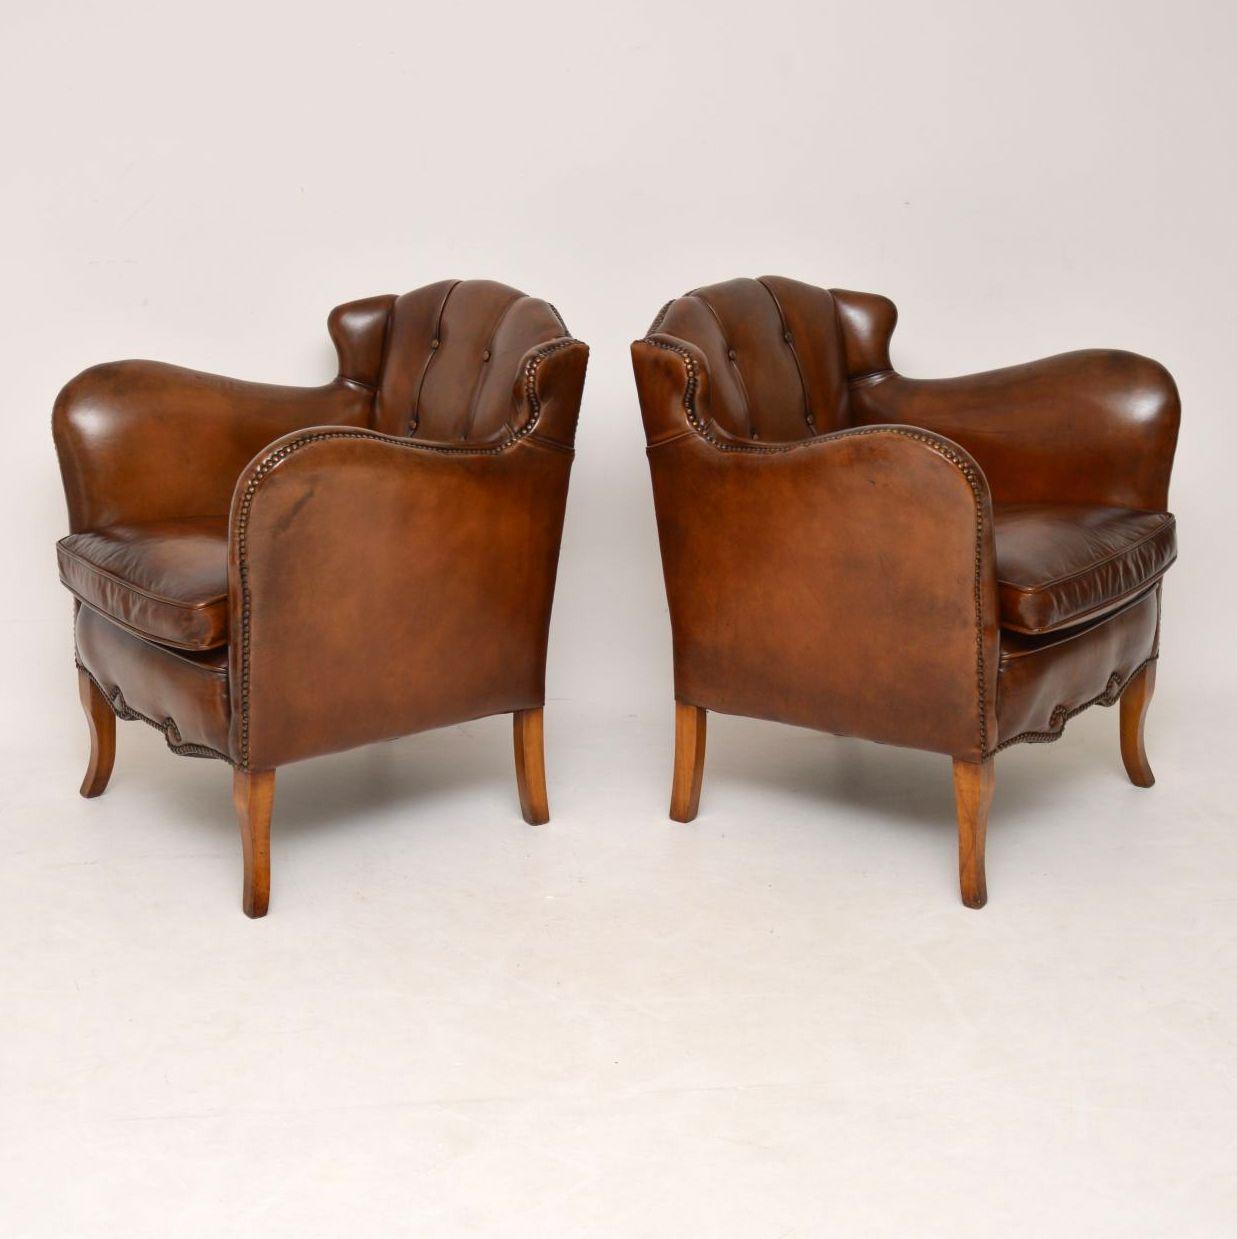 Very stylish pair of Swedish antique leather armchairs in fabulous condition and dating to circa 1890-1910 period. These chairs have wonderful shaping and features all the way around, so please enlarge all the images. The inside backs are deep